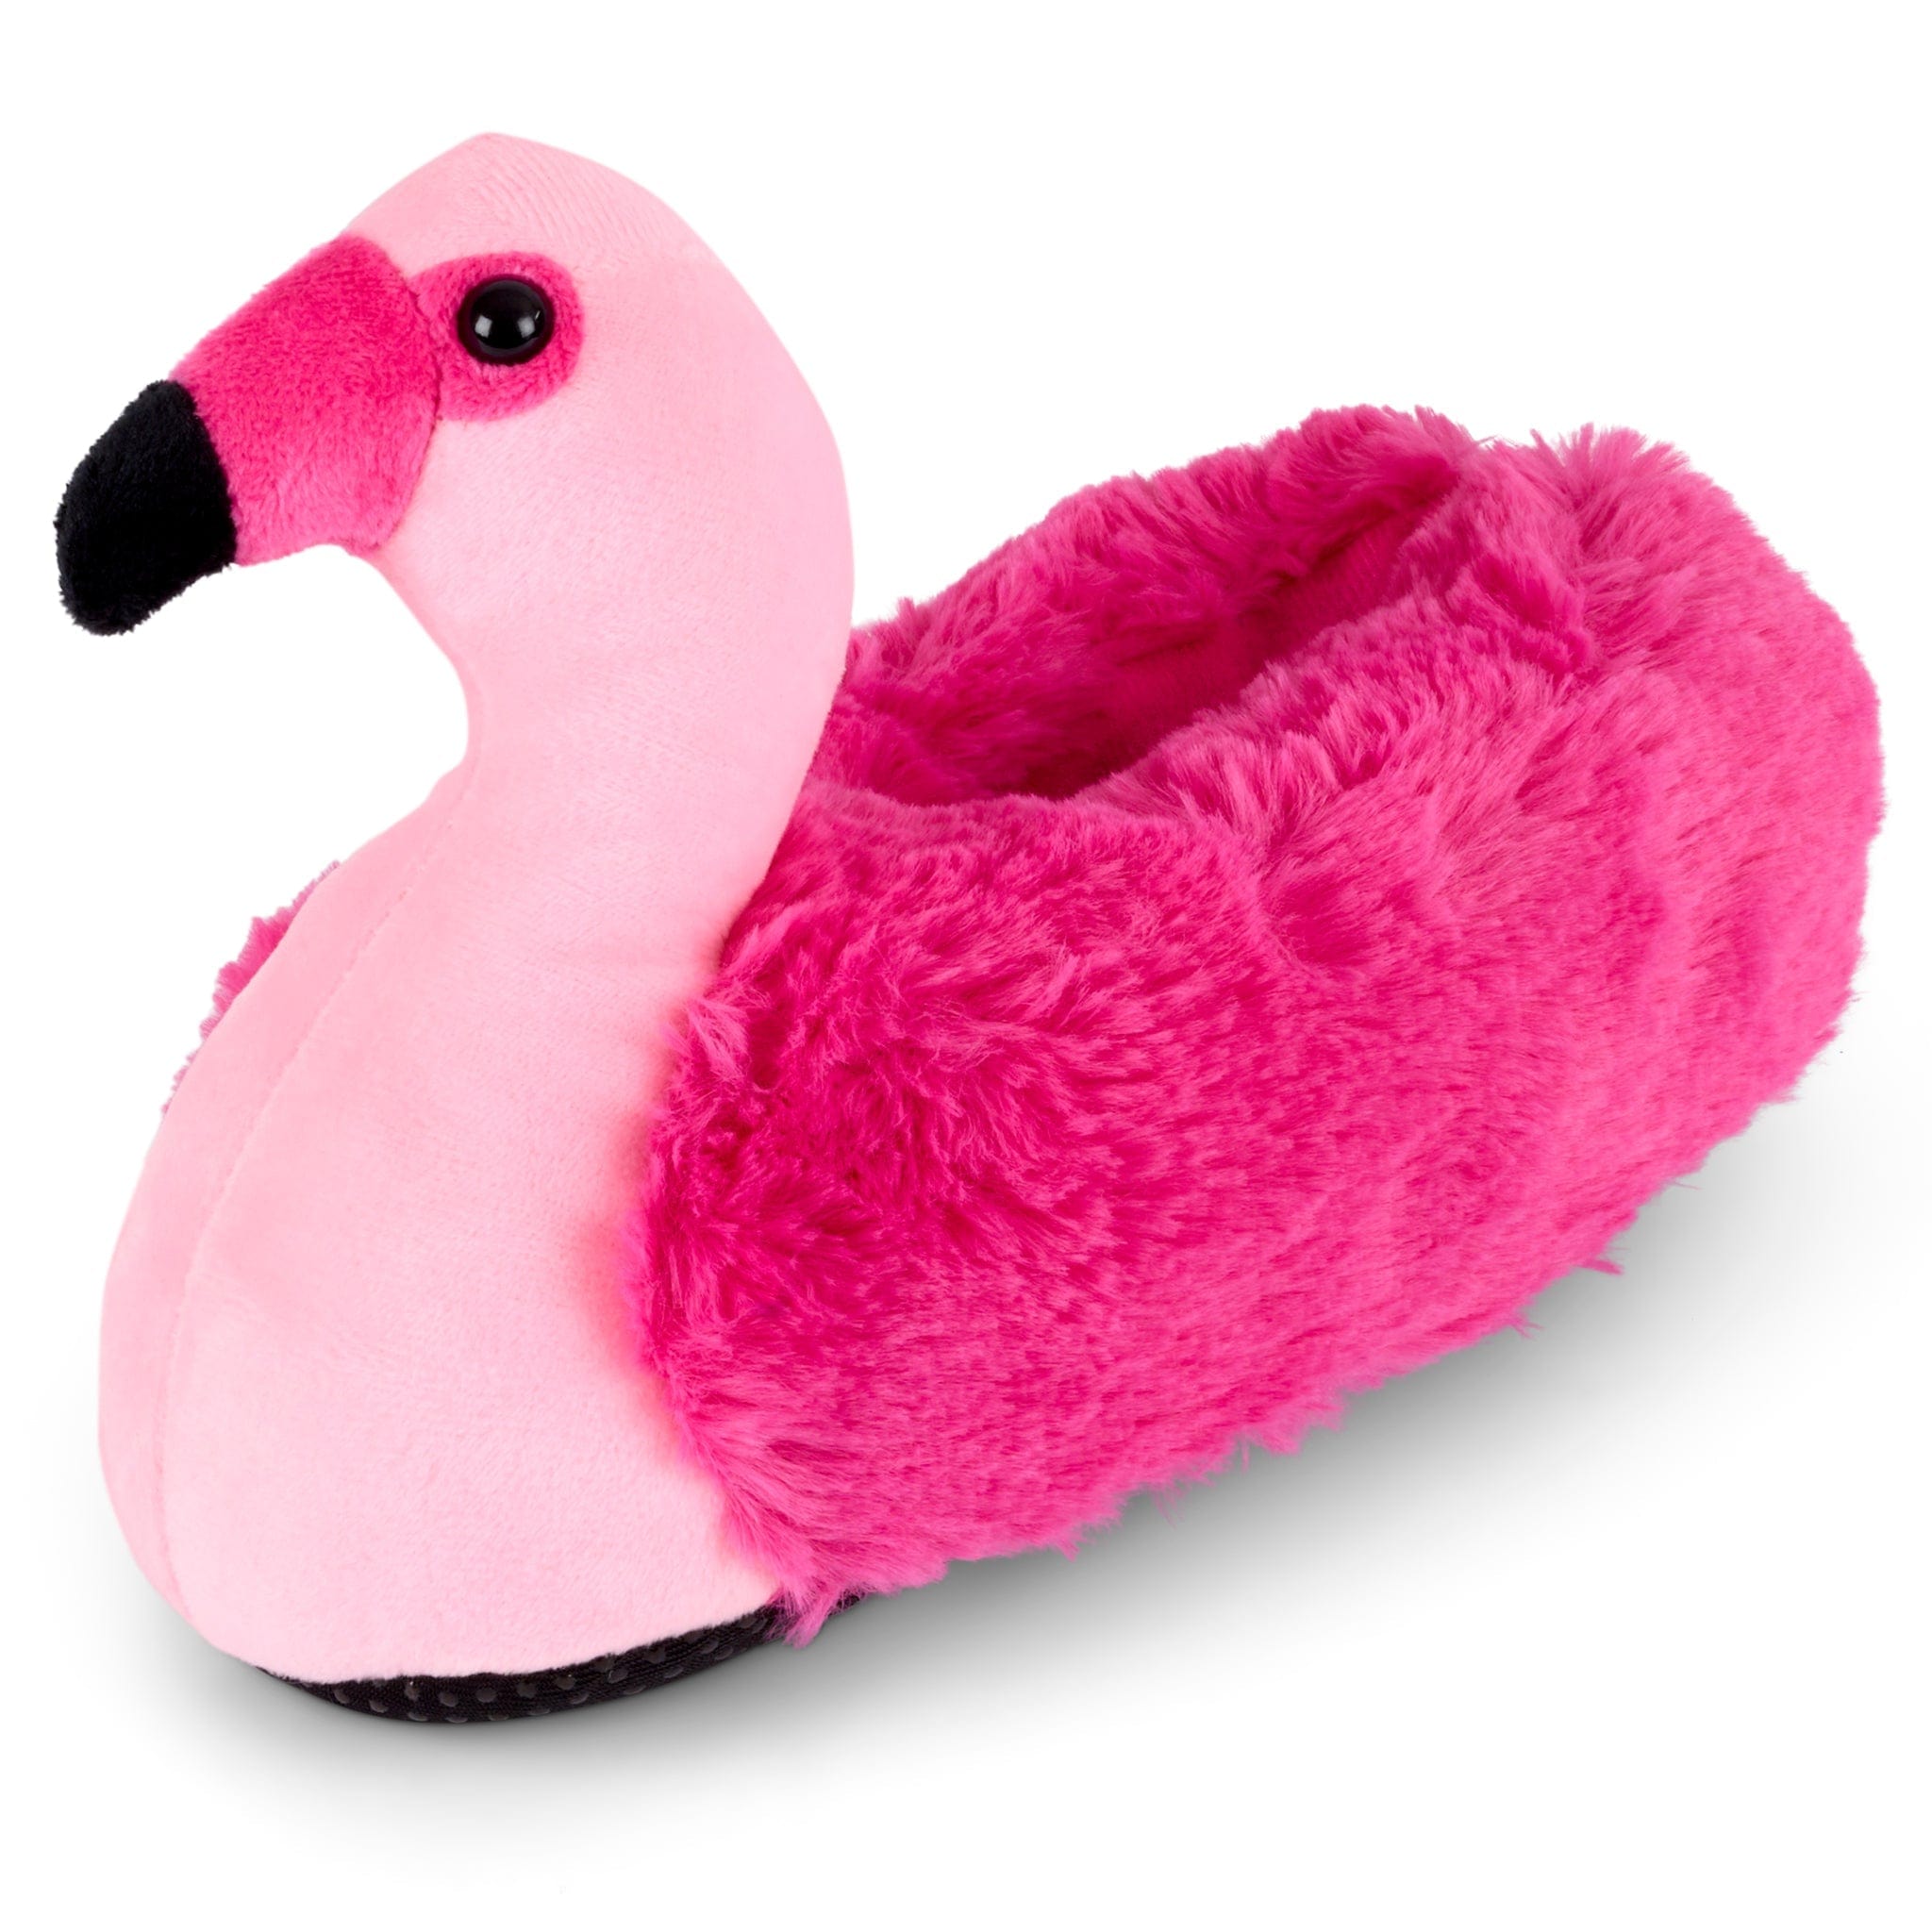 3D Plush Pink Flamingo Slippers - Size UK Kids 11 - 1Y only5pounds-com